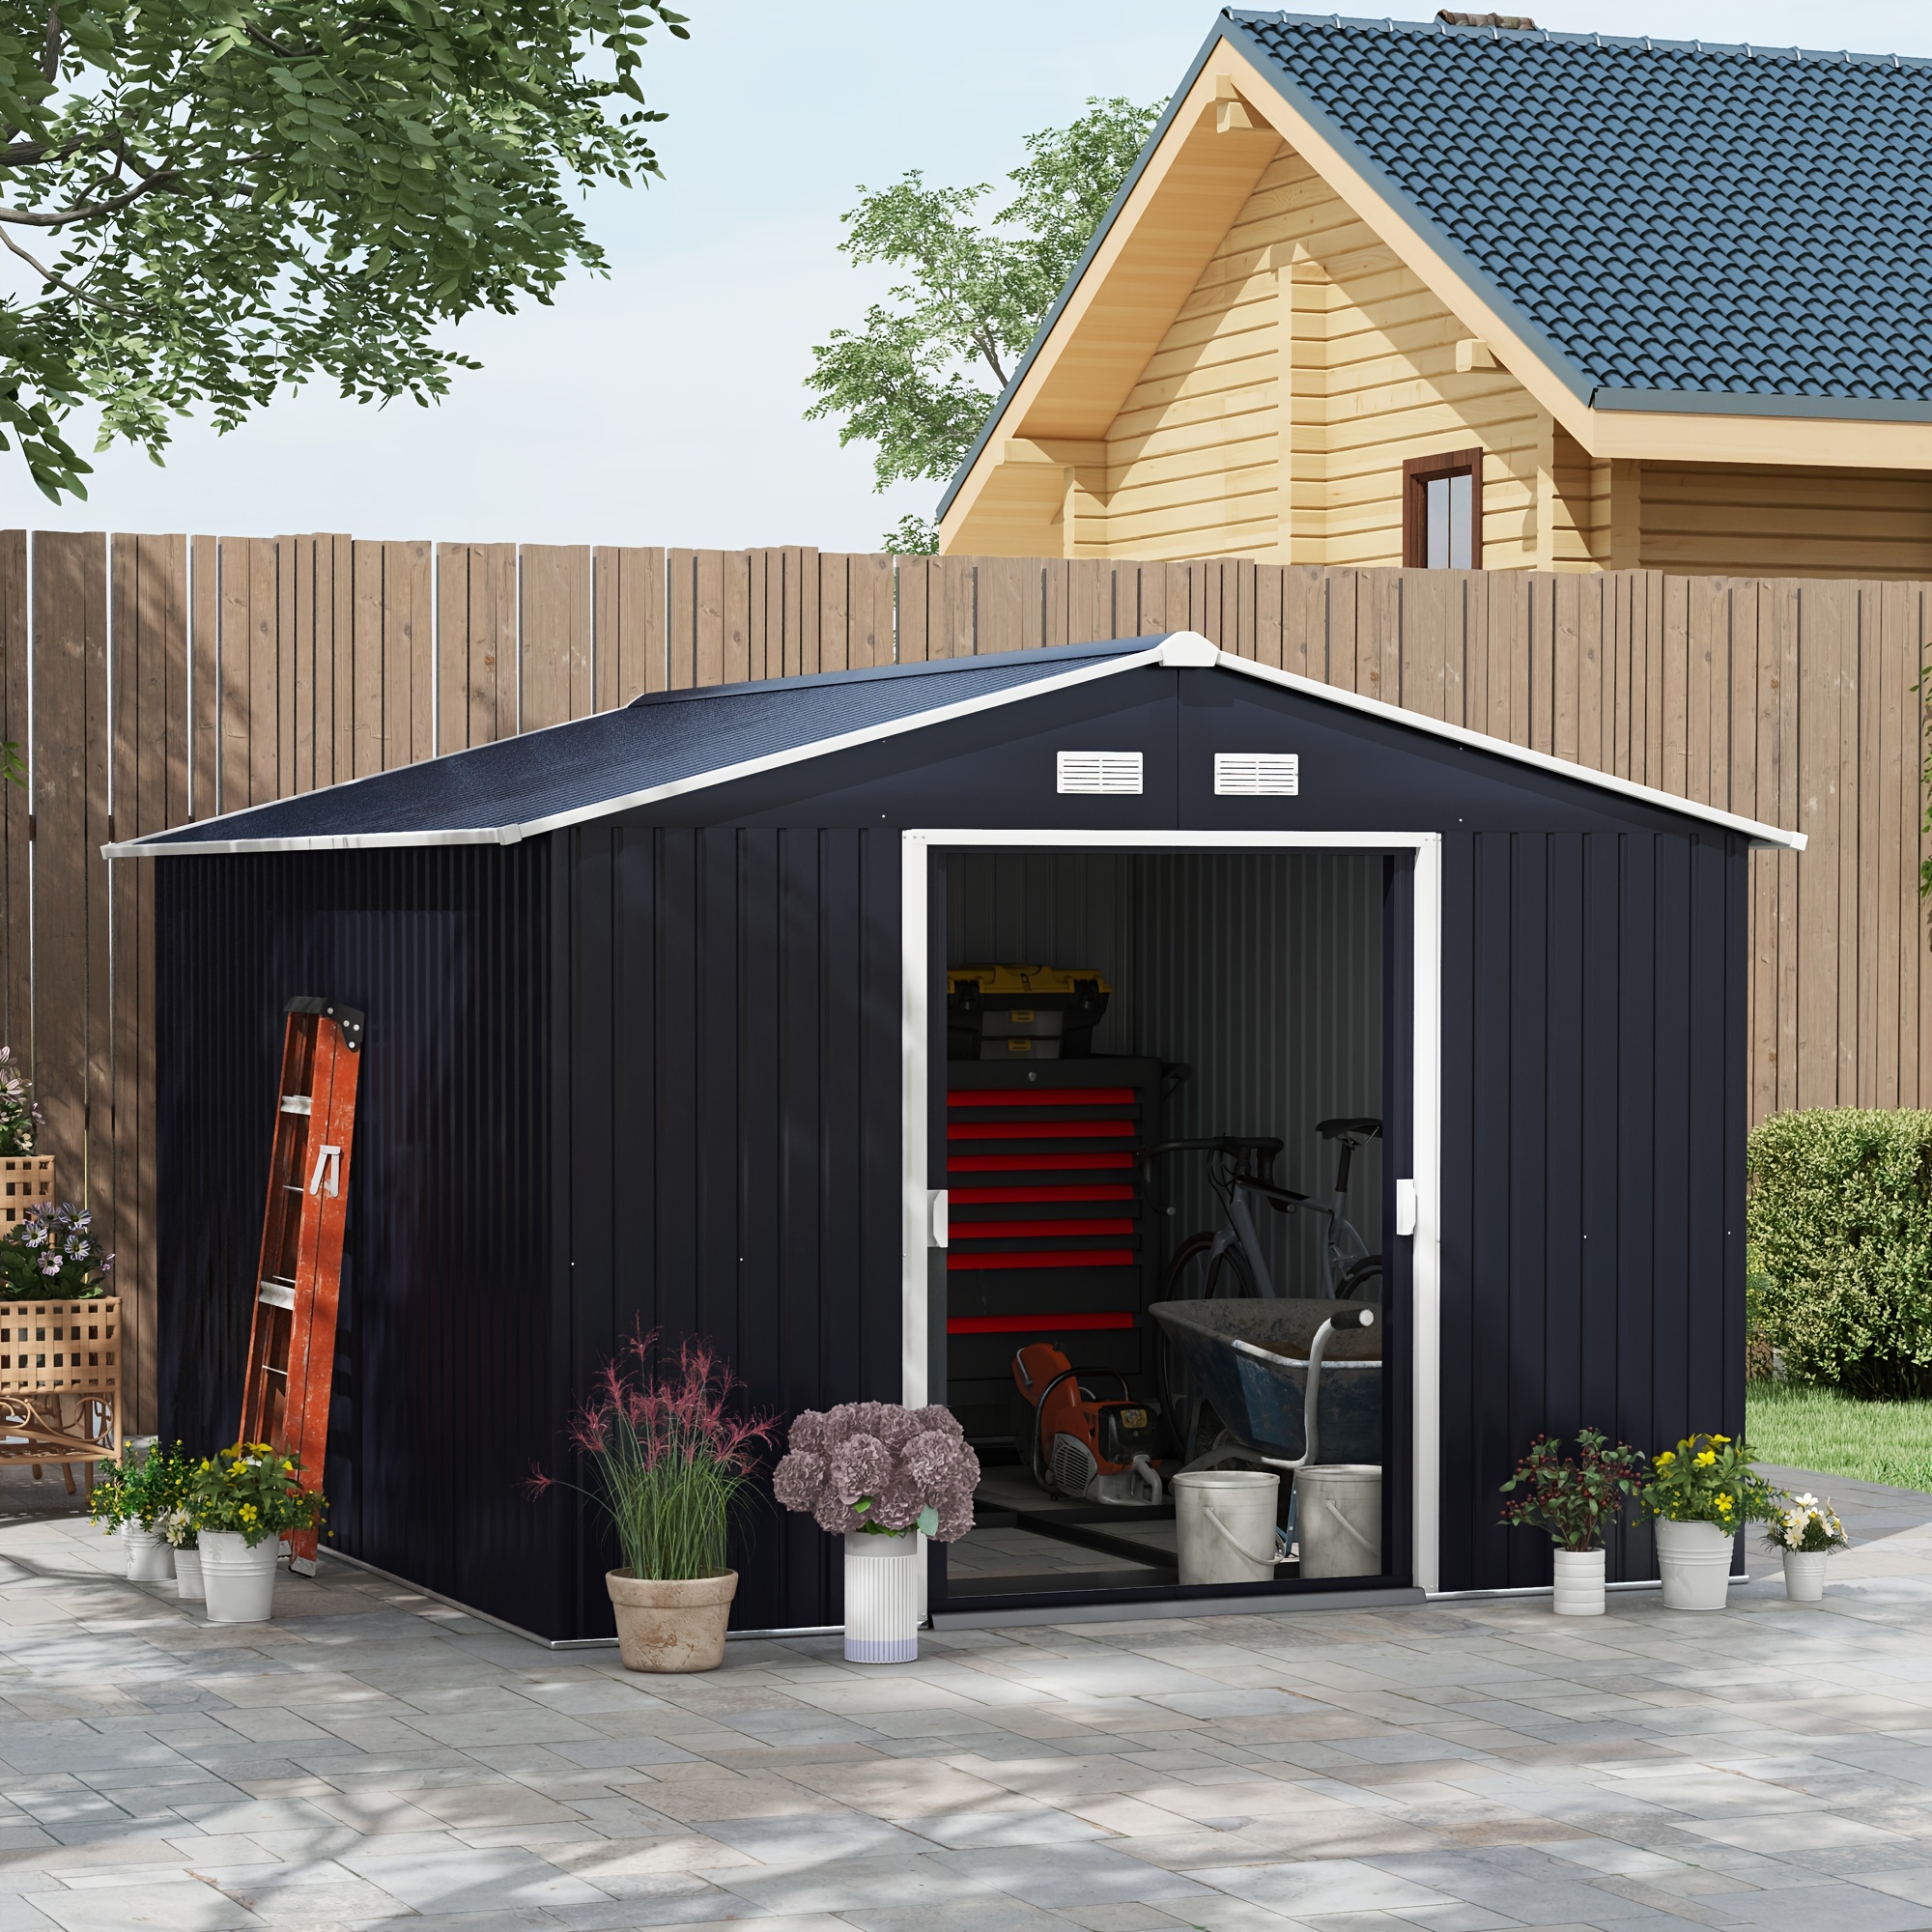 

Outsunny 11' X 9' Outdoor Storage Shed, Garden With Foundation Kit, 4 Vents And Sliding Doors For Backyard, Patio, Garage, Lawn, Dark Gray